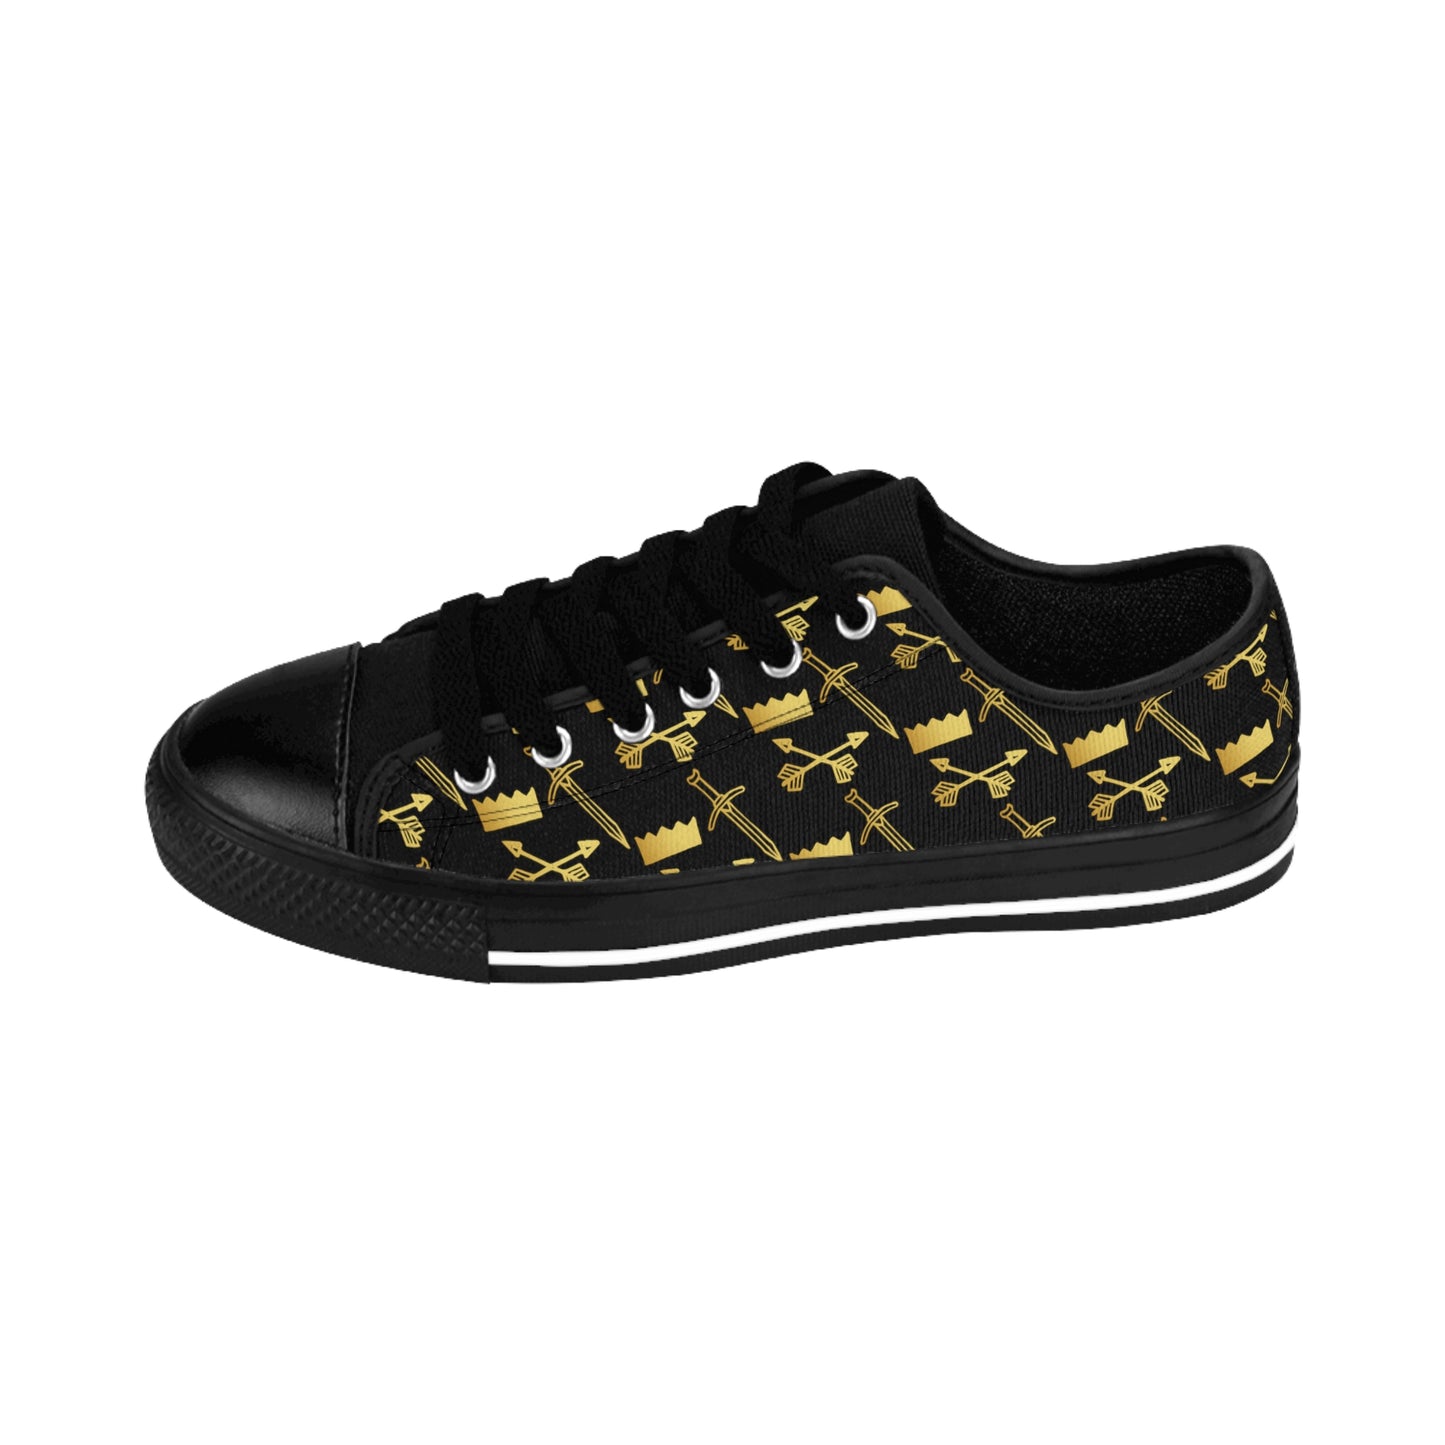 Men's - Gold and Bold Warrior - Sneakers